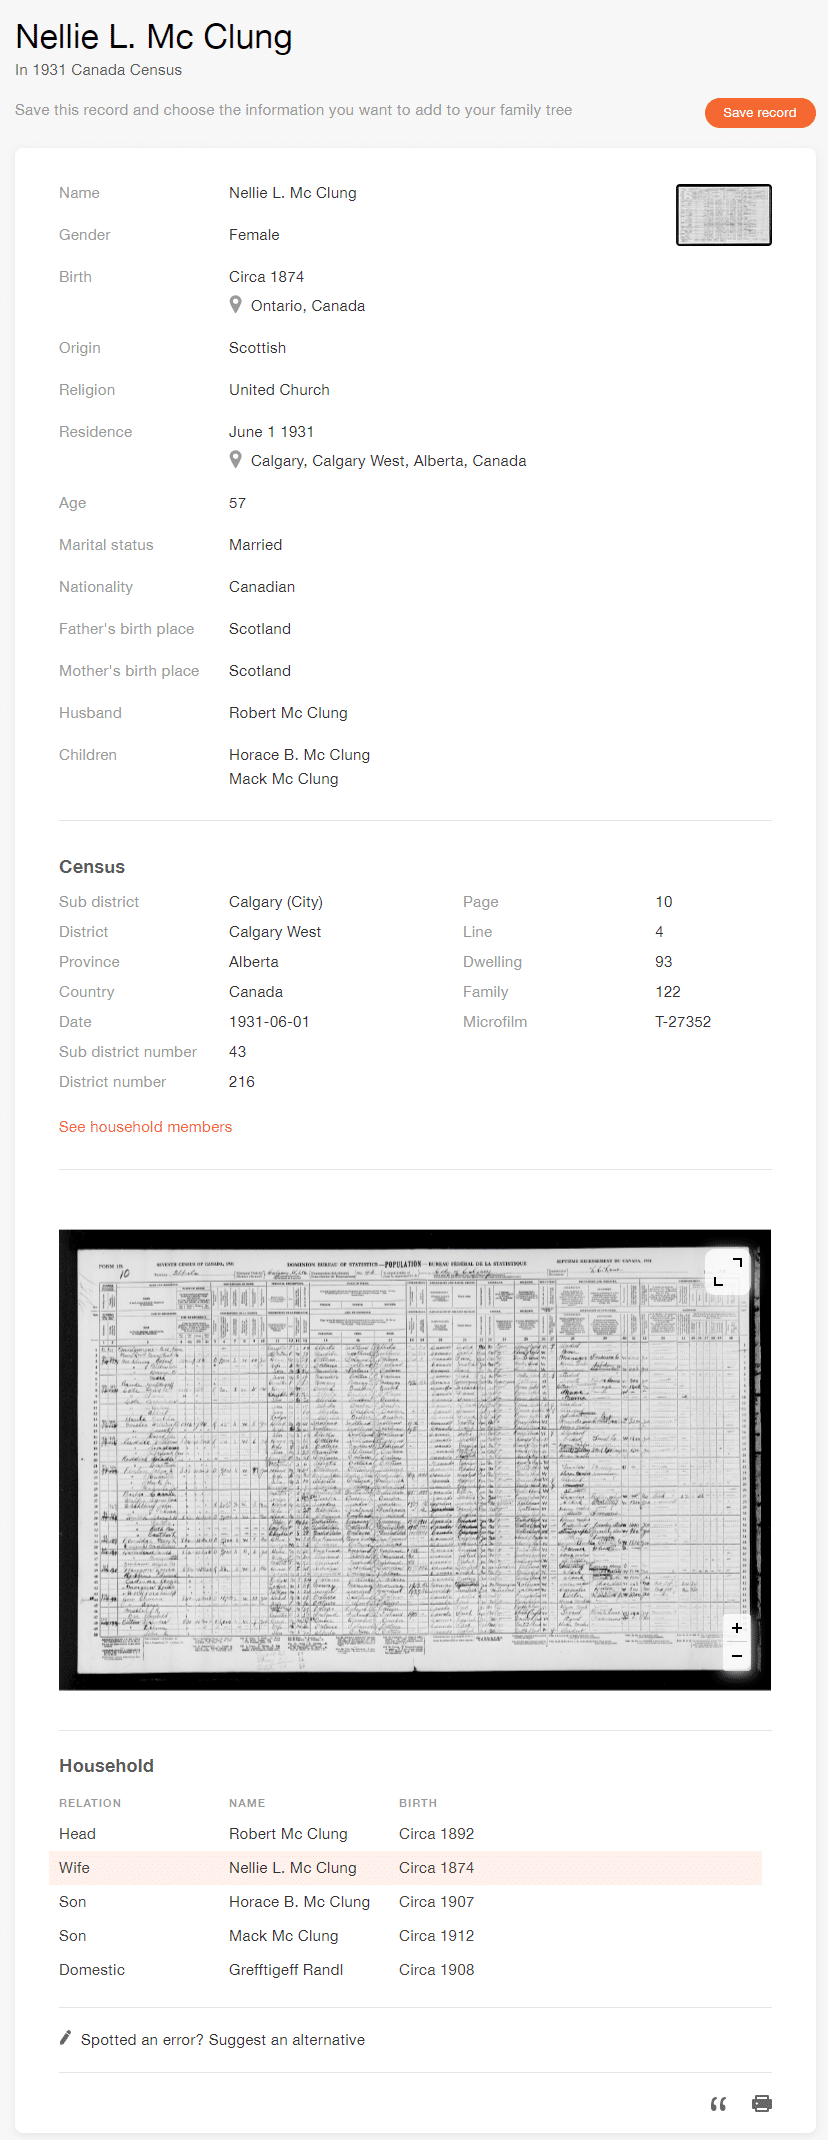 Record for Nellie L. McClung in the 1931 Canada Census collection on MyHeritage